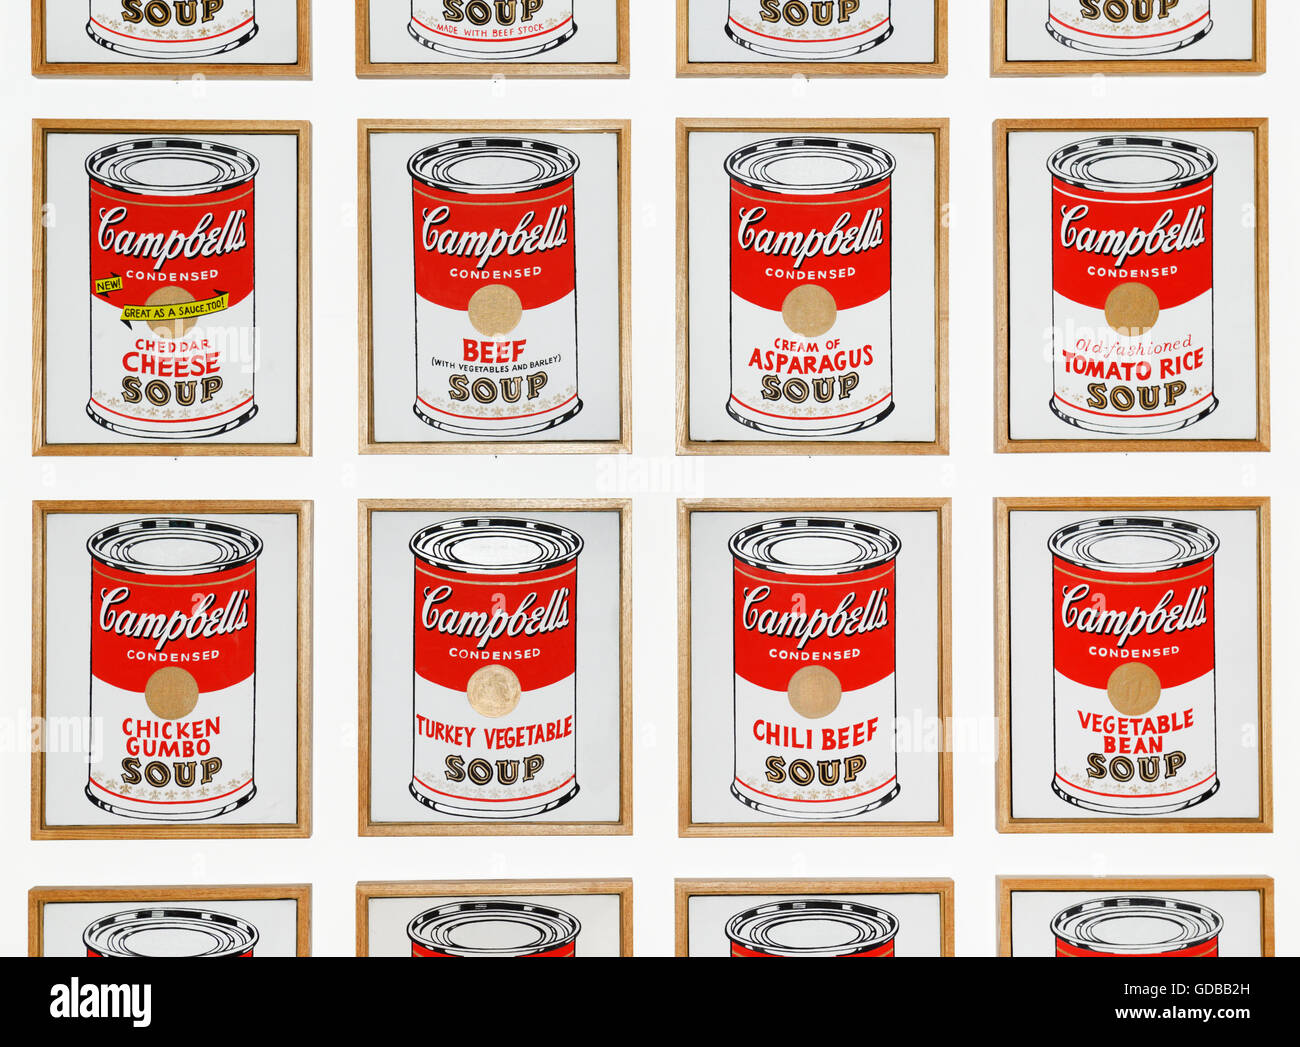 Warhol's Campbell's Soup Cans, 1962, detail showing 8 of the 32 cans Stock Photo